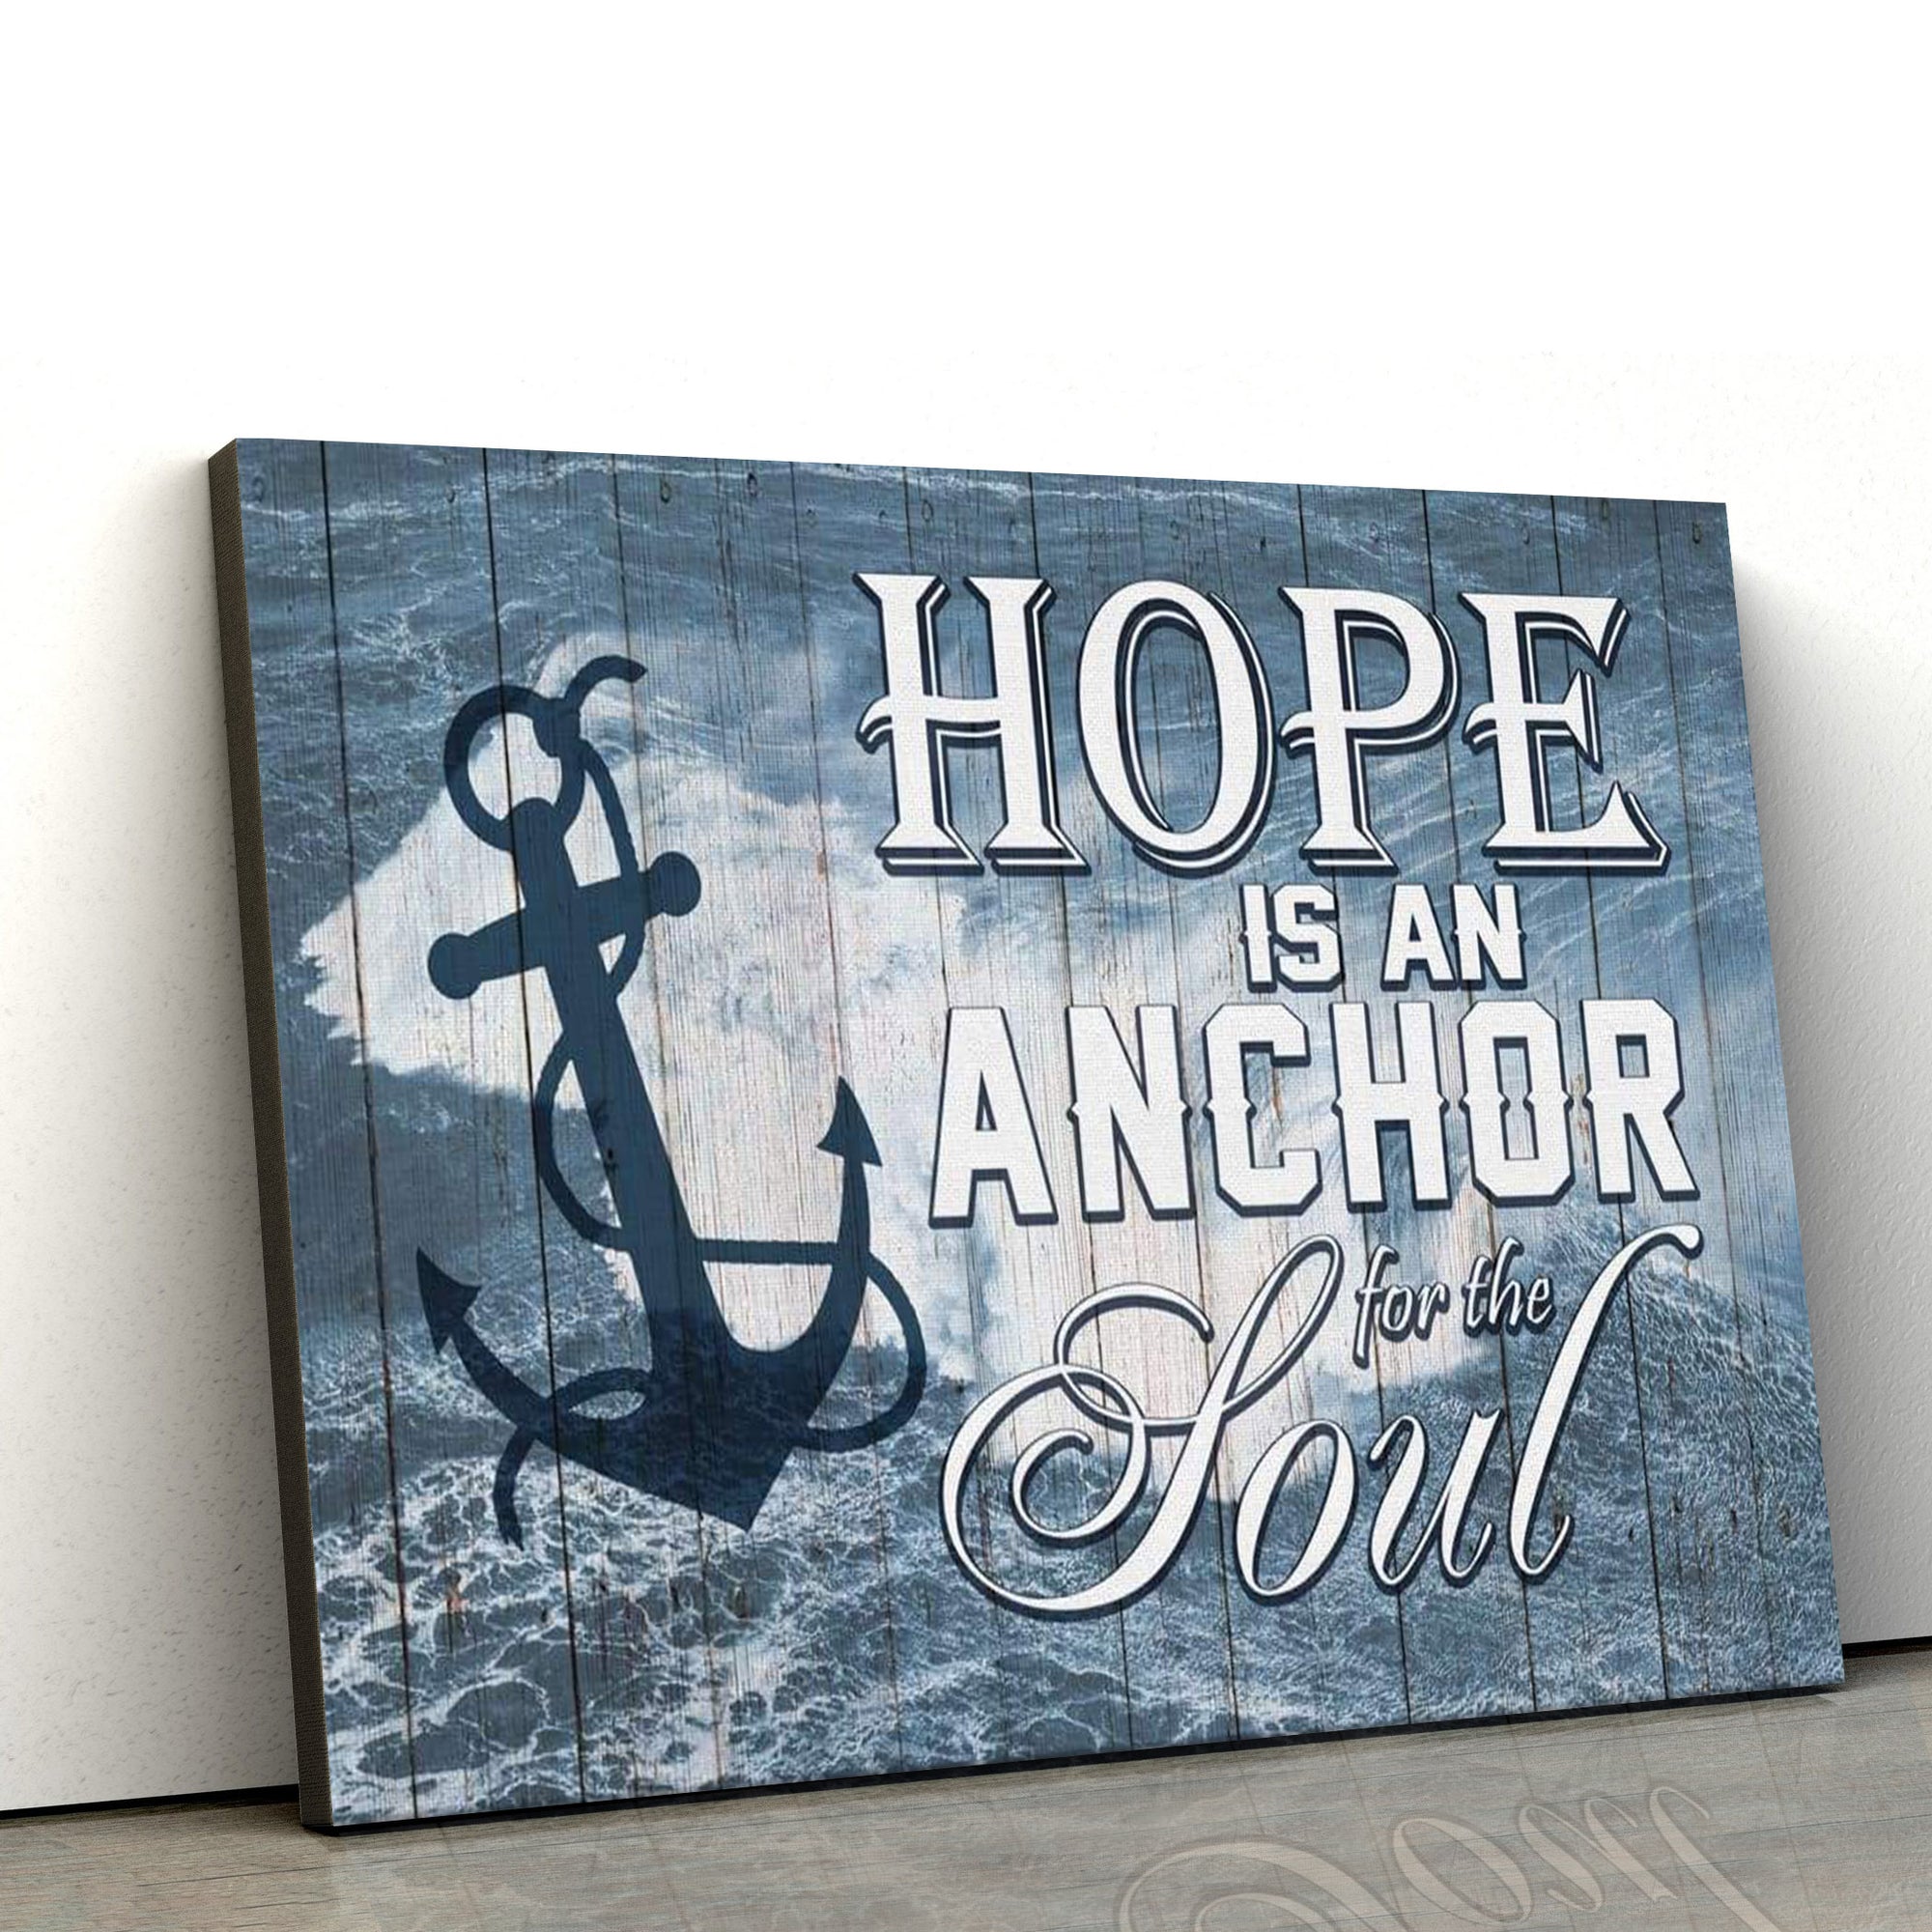 Hope Is An Anchor For The Soul Christian Wall Art Canvas Print - Religious Canvas Painting